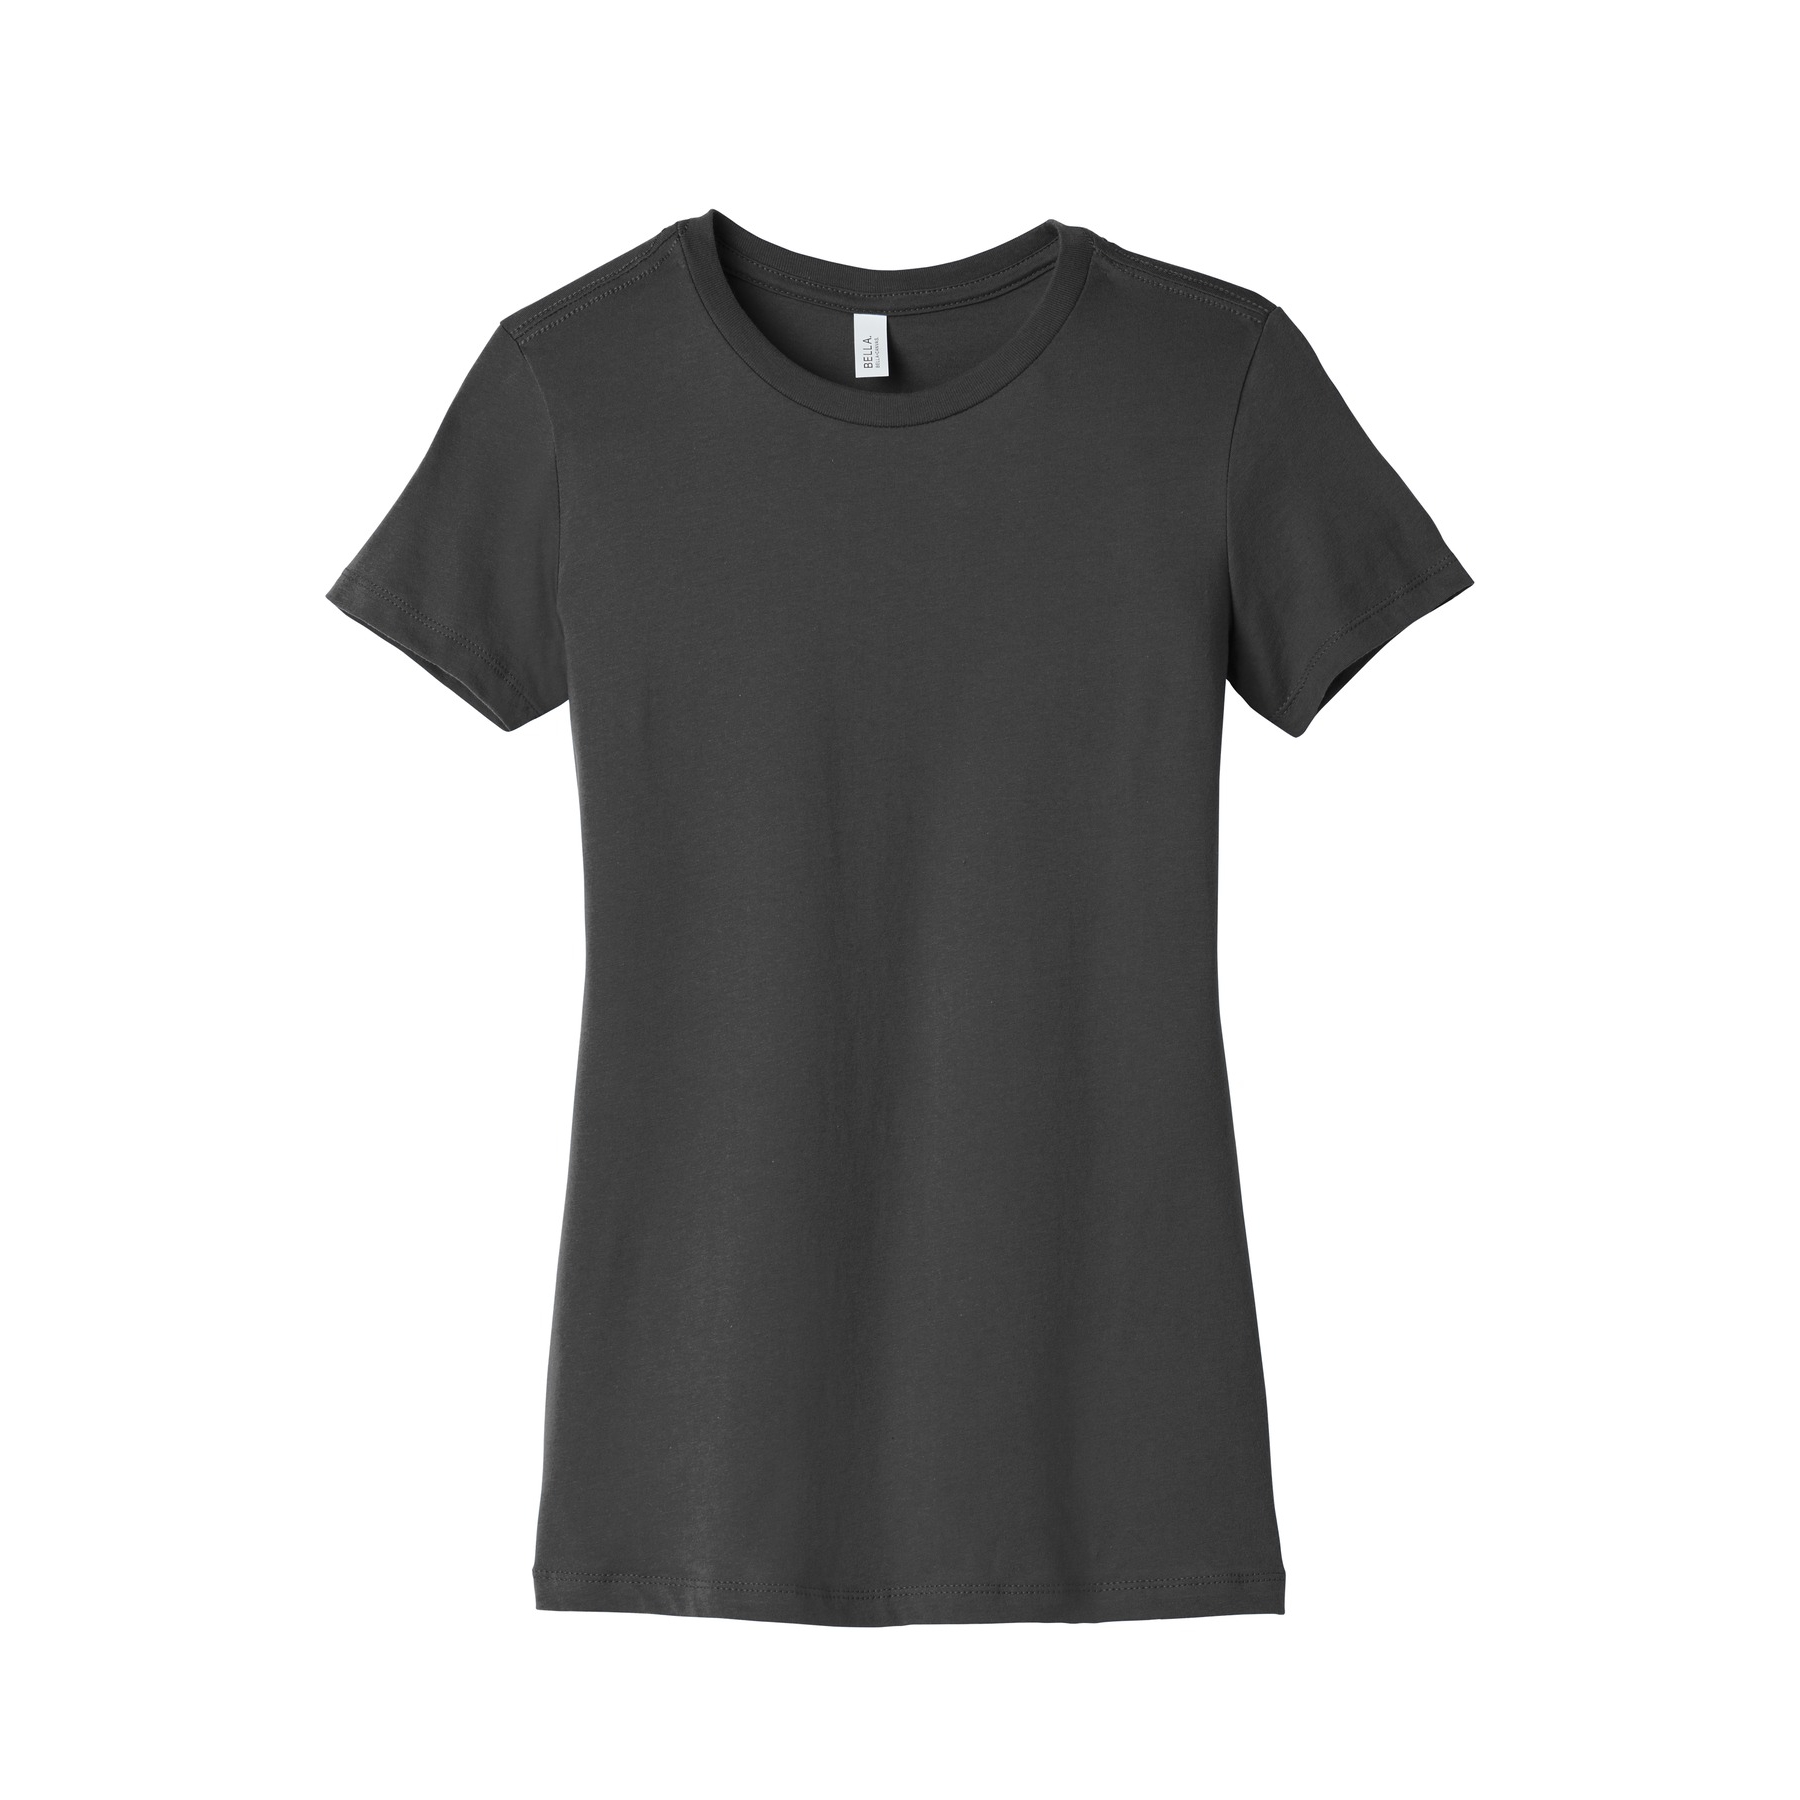 BELLA+CANVAS ® Women's Slim Fit Tee. BC6004 | Colman and Company